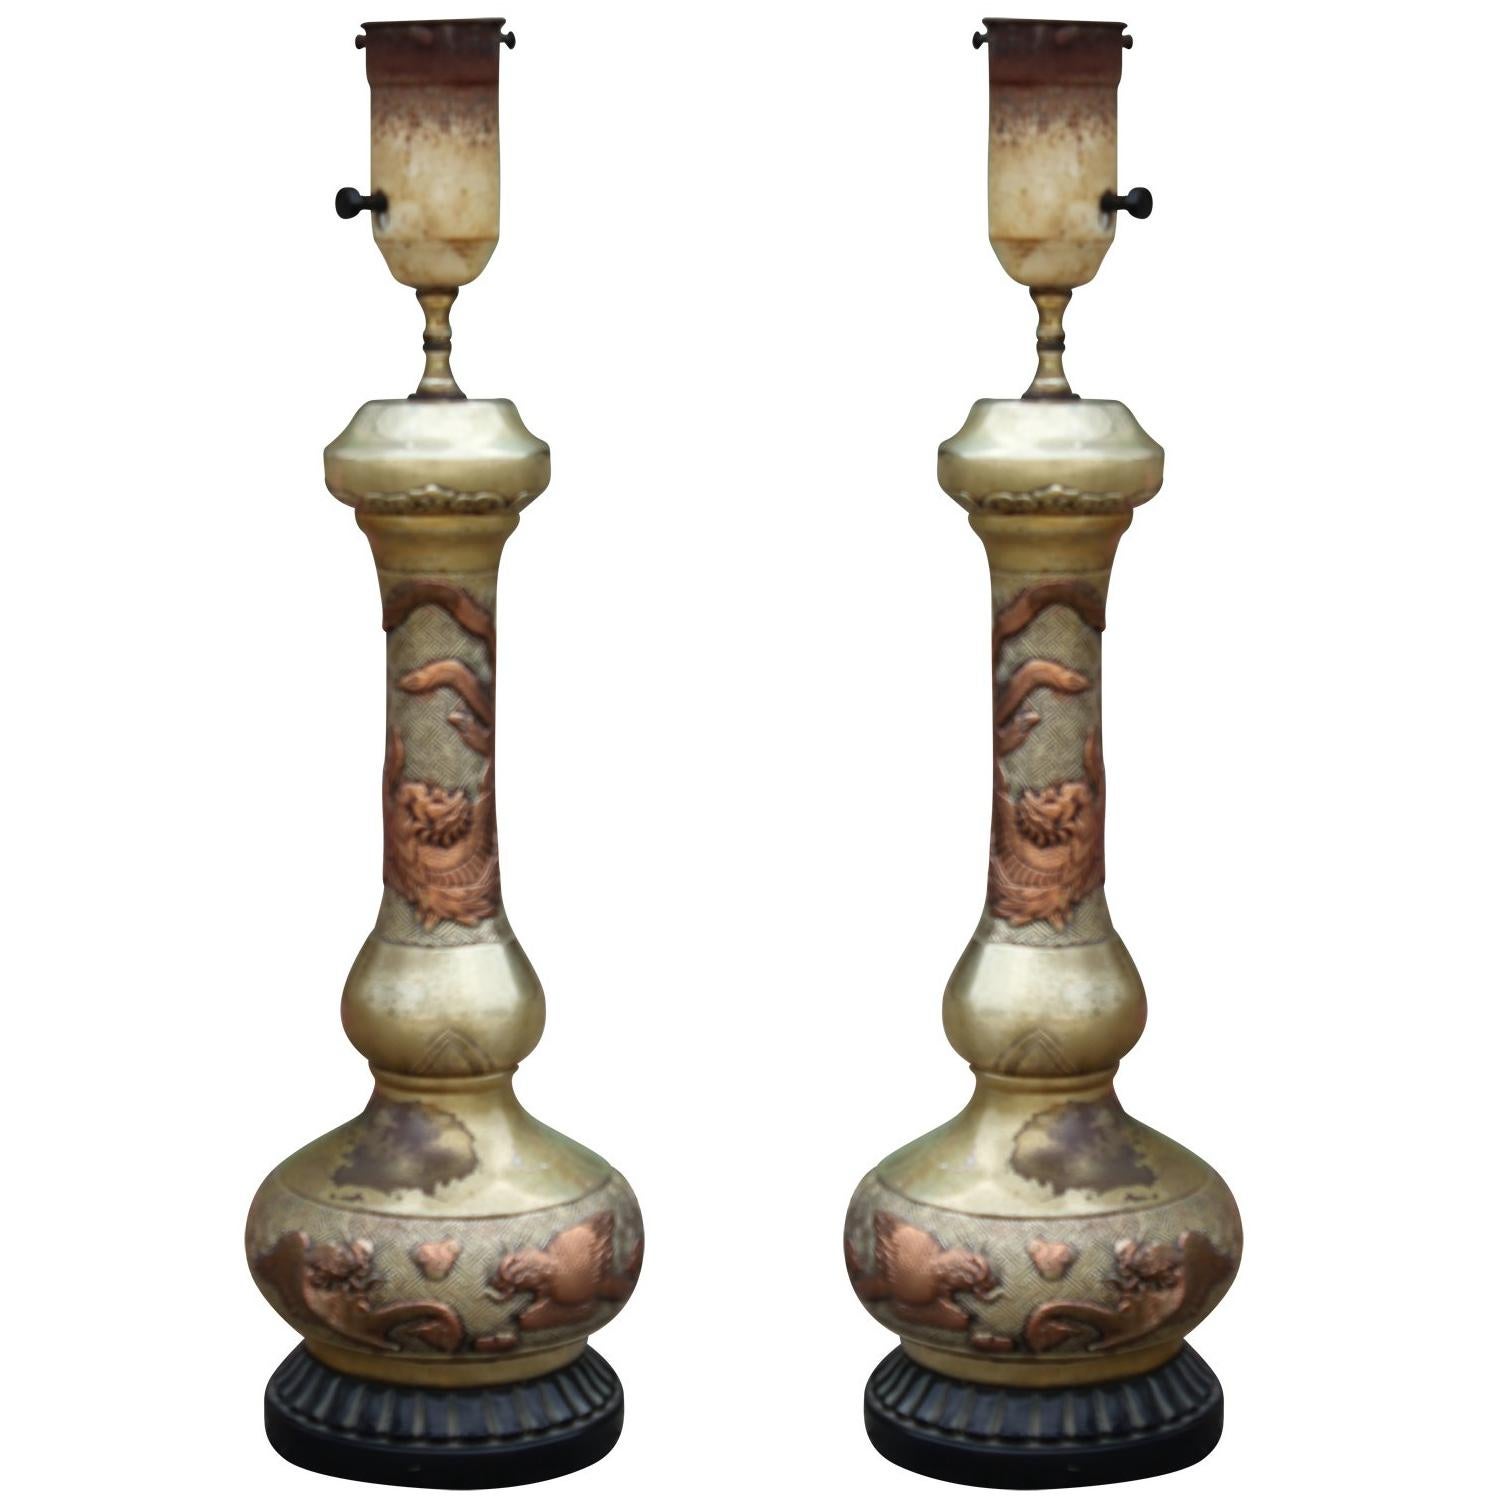 Pair of Solid Copper Asian Style Lamps with Dragon Motifs and Silver Wash